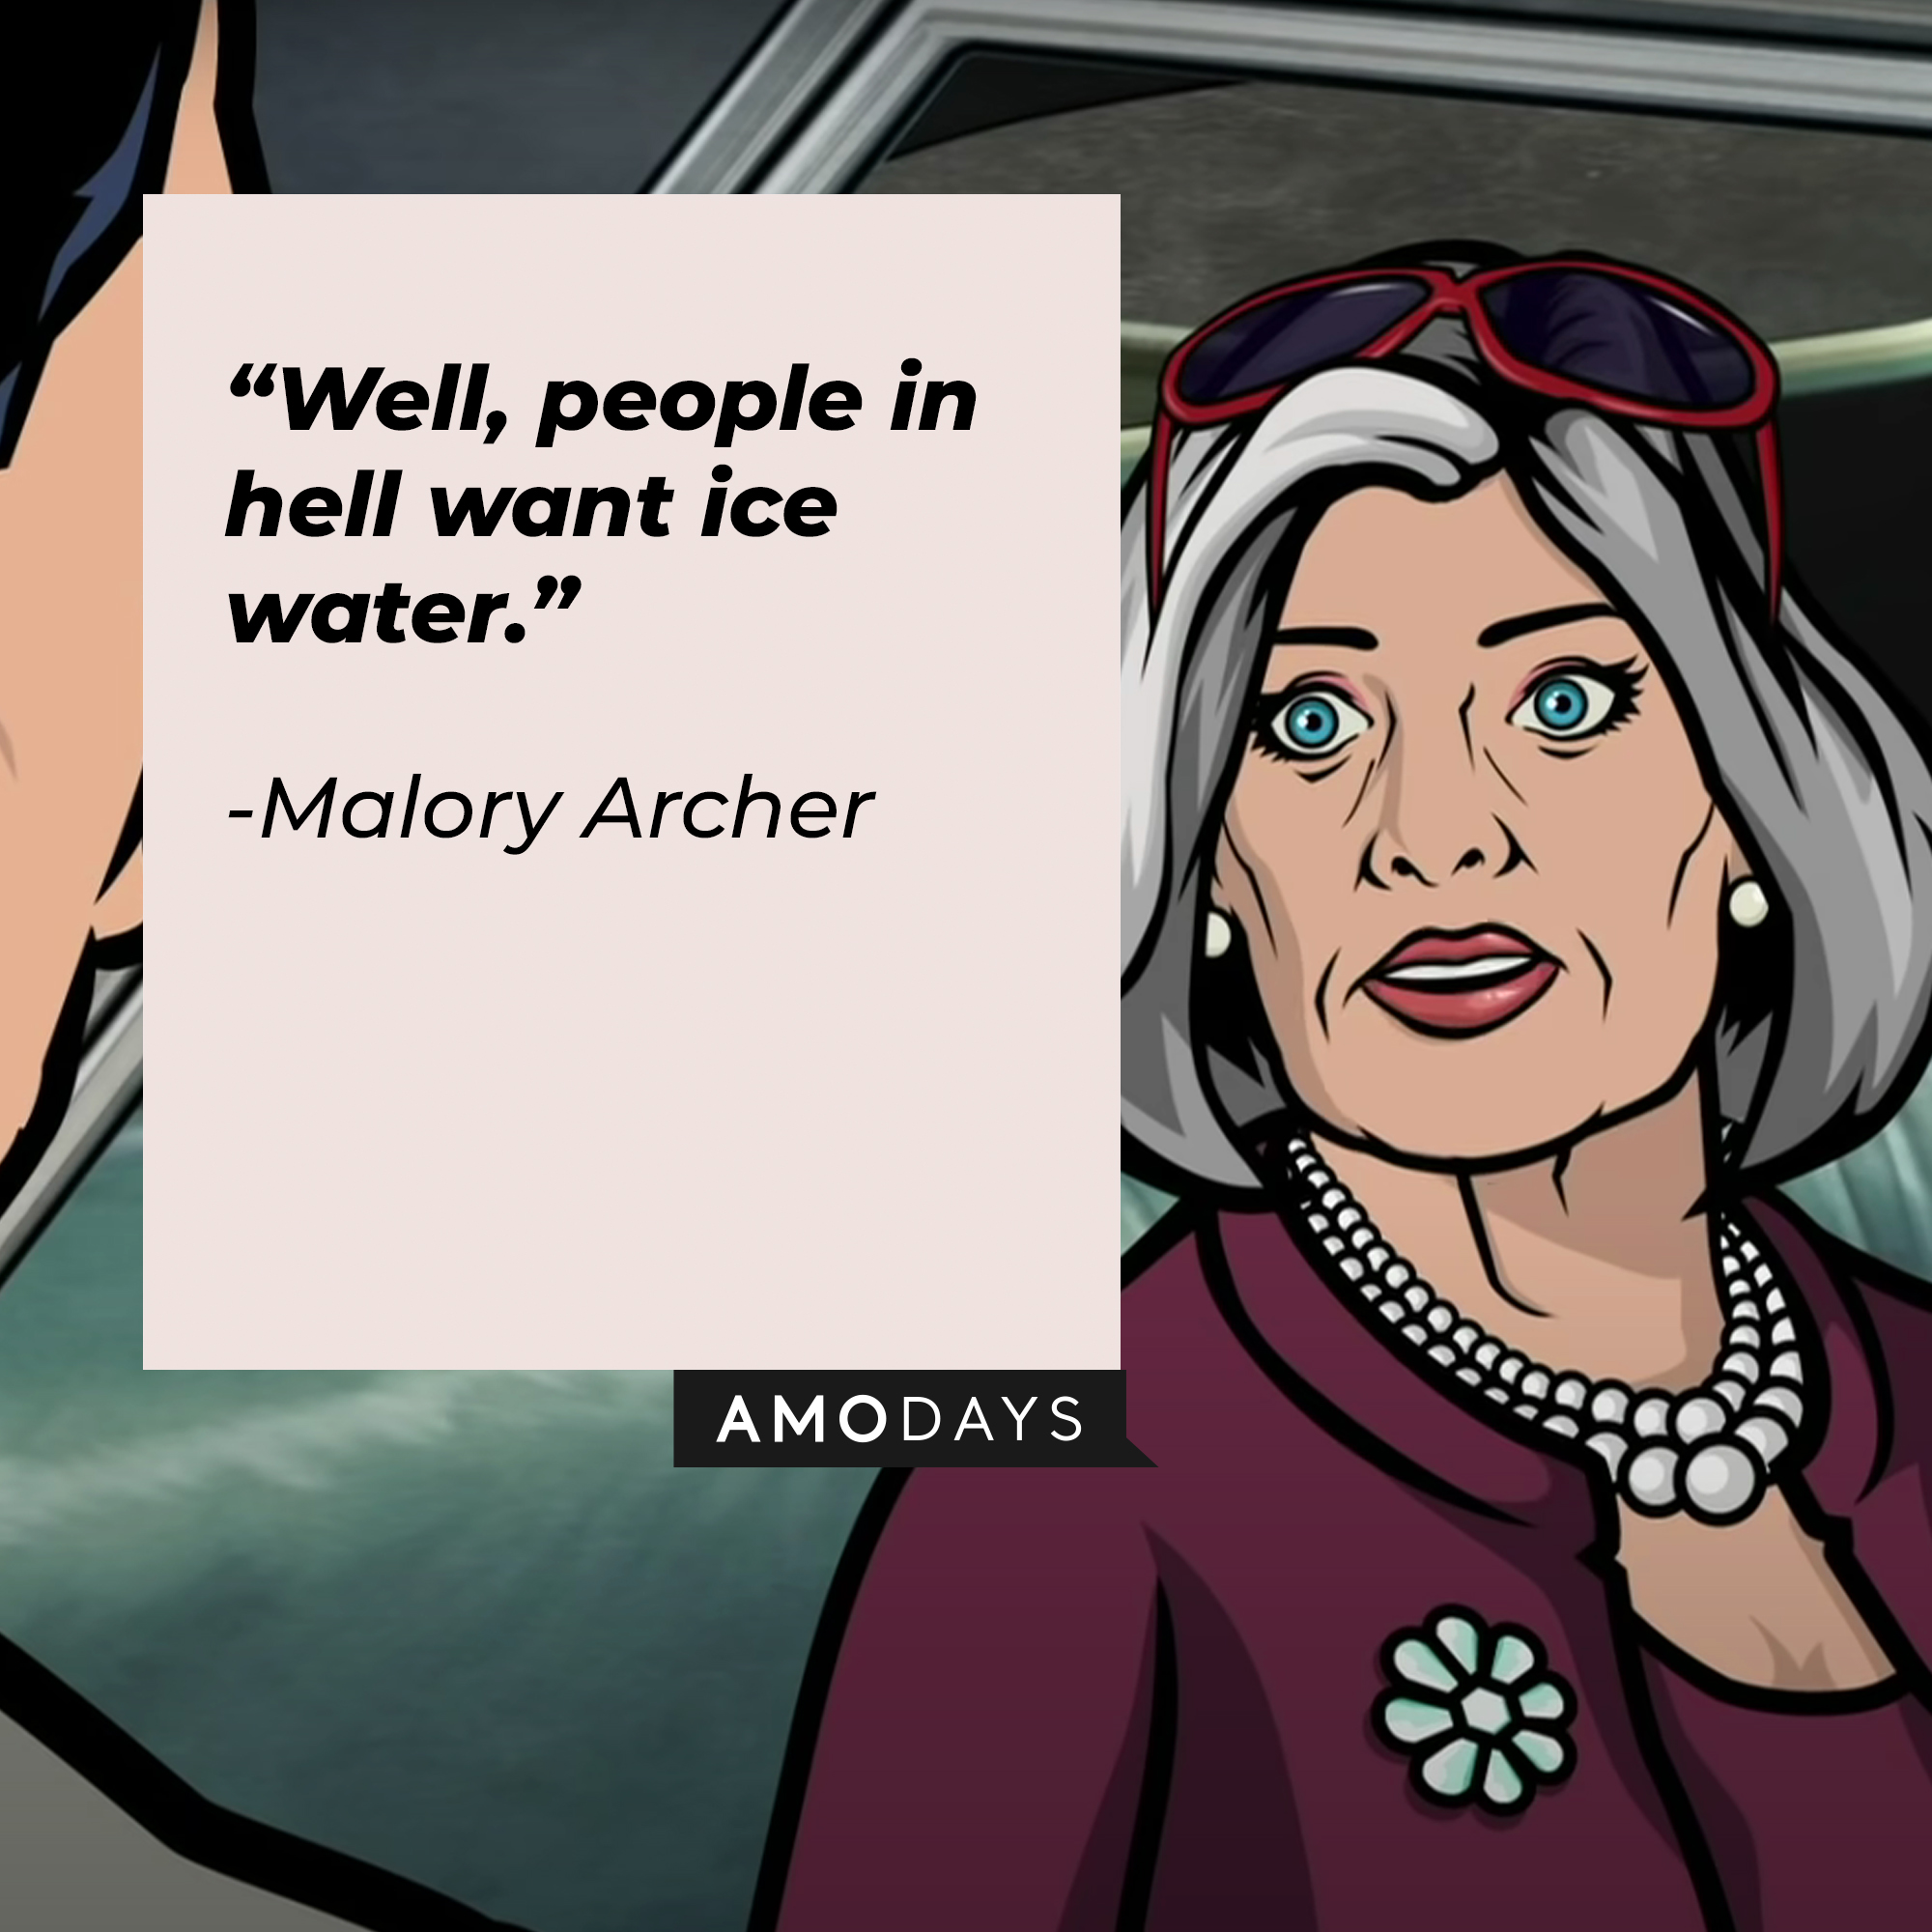 An Image of Malory Archer with her quote: “Well, people in hell want ice water.” | Source: Youtube.com/Netflixnordic